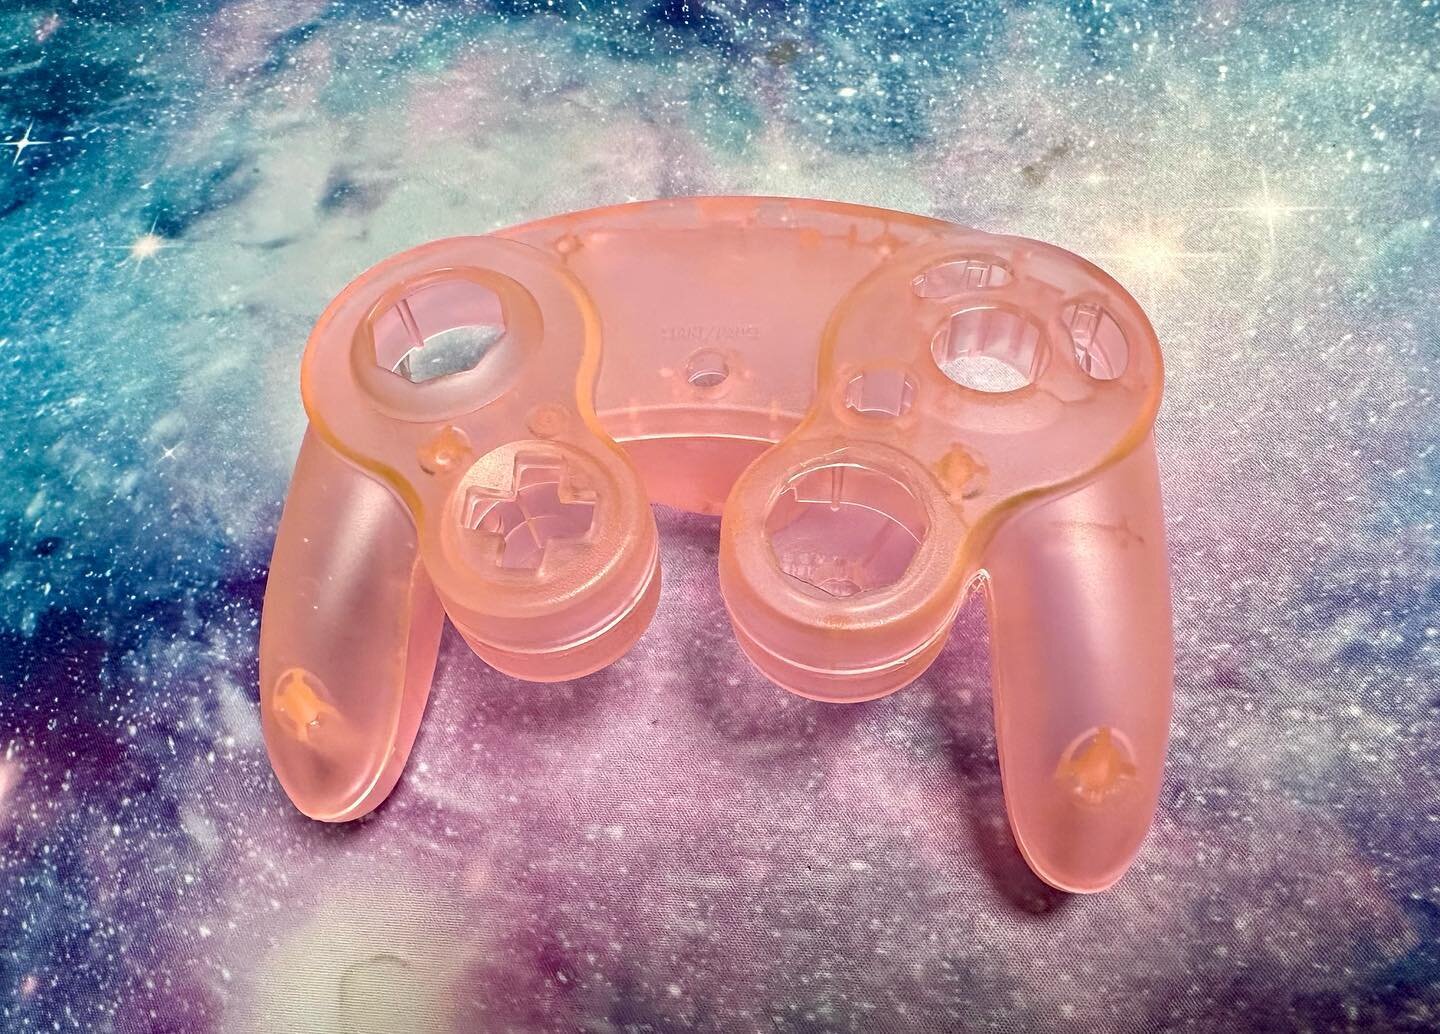 What would you call this color? It&rsquo;s like kinda pink kinda orange. Is it salmon? Is it coral? Idek what to call it
&bull;
&bull;
&bull;
------------------------------
&bull;
&bull;
&bull;
#supersmashbros #supersmashbrosultimate #smashbros #smas